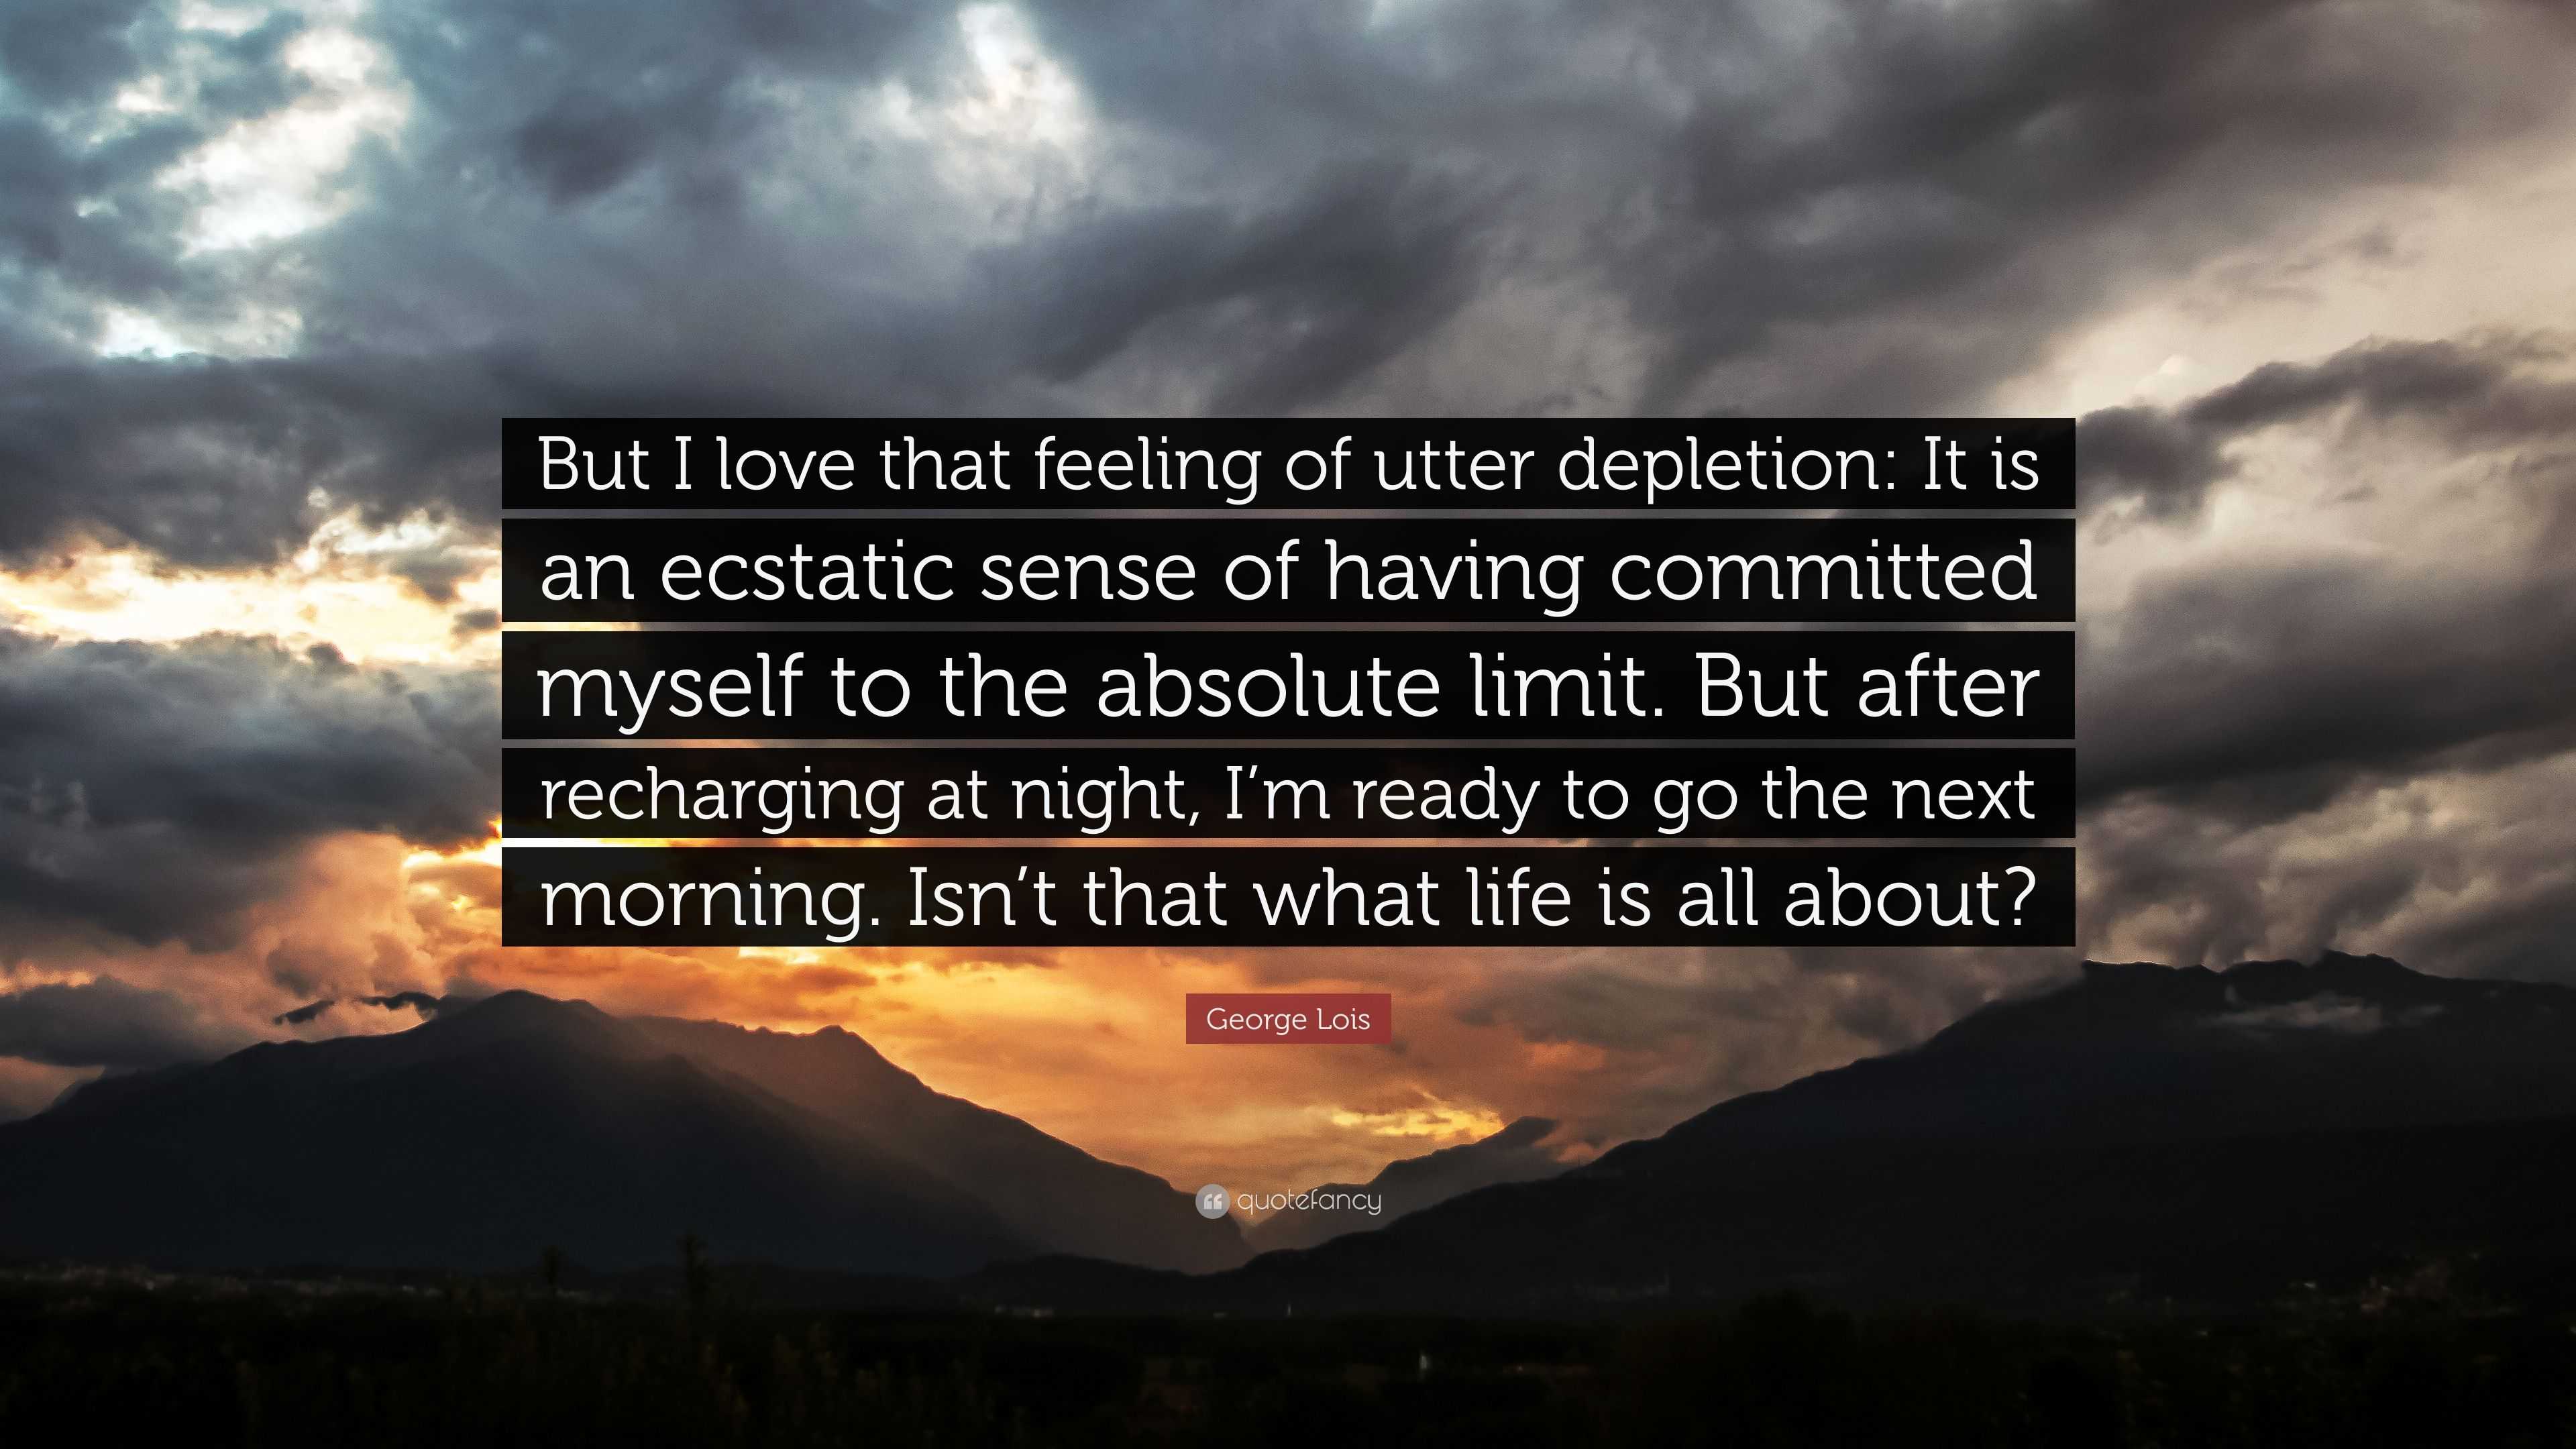 George Lois Quote “But I love that feeling of utter depletion It is